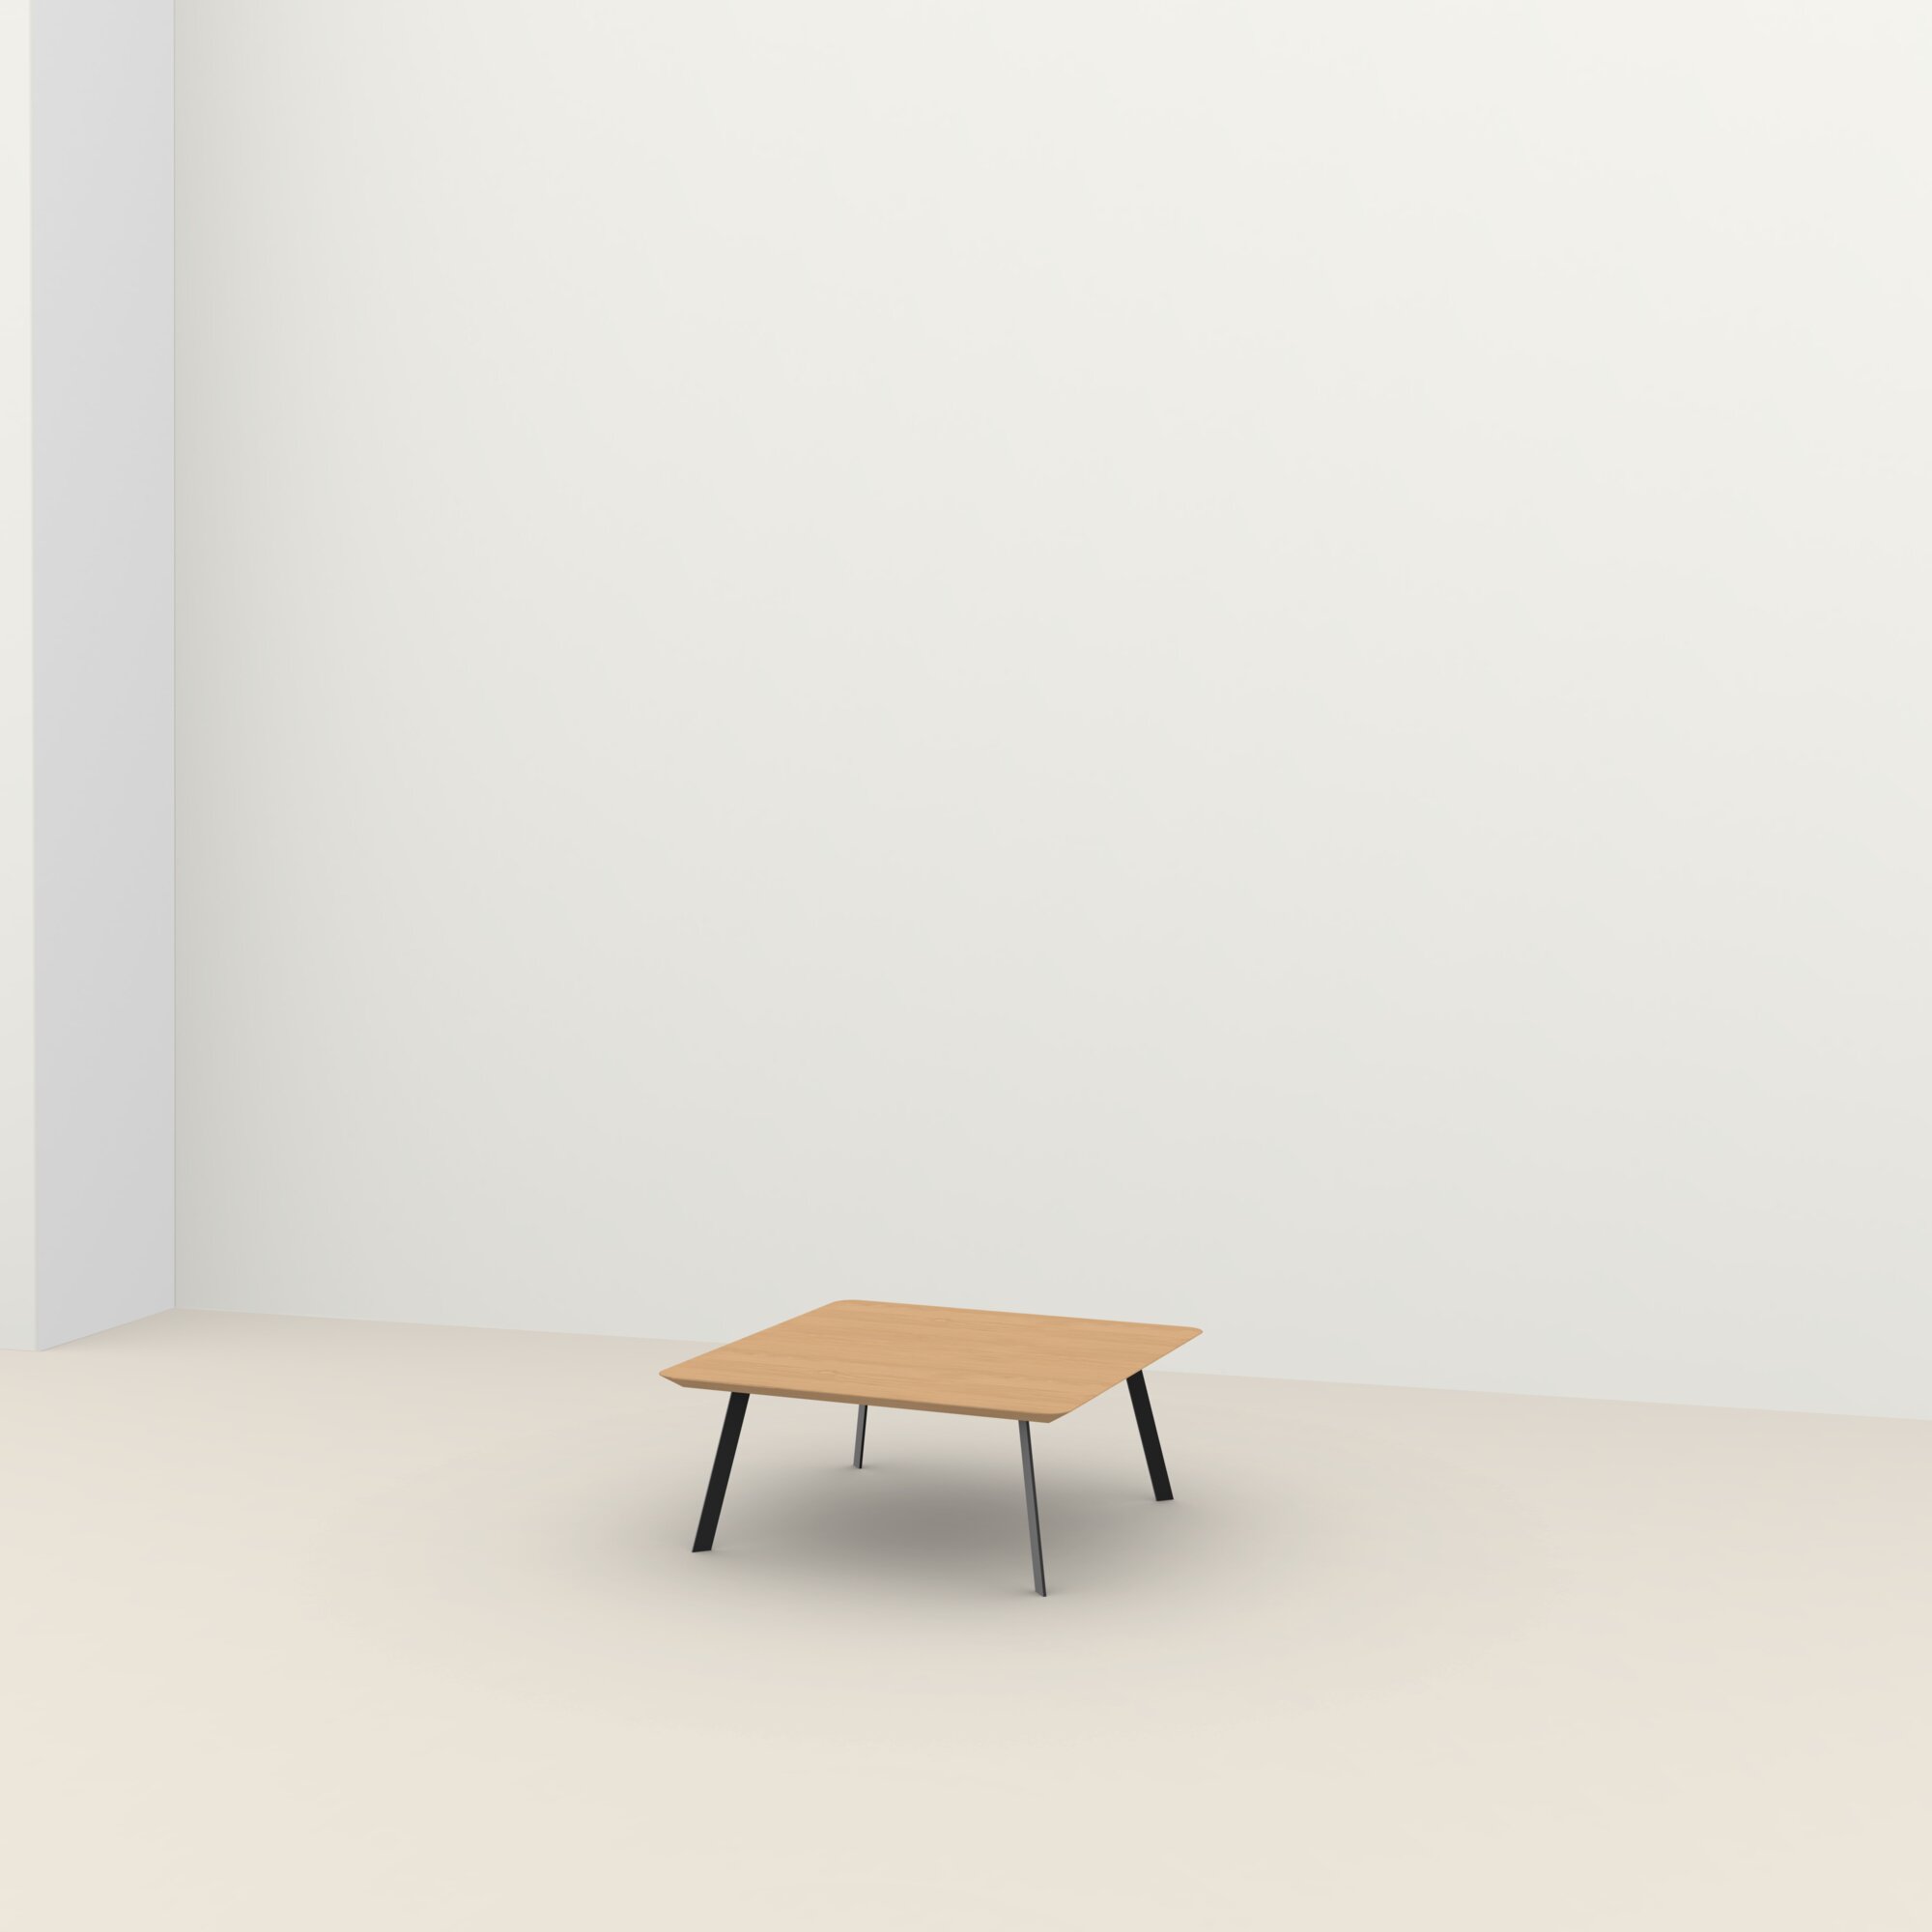 google_coffee_table_title_suffix | New Co Coffee Table 90 Square Black | Oak hardwax oil natural light 3041 | Studio HENK | 